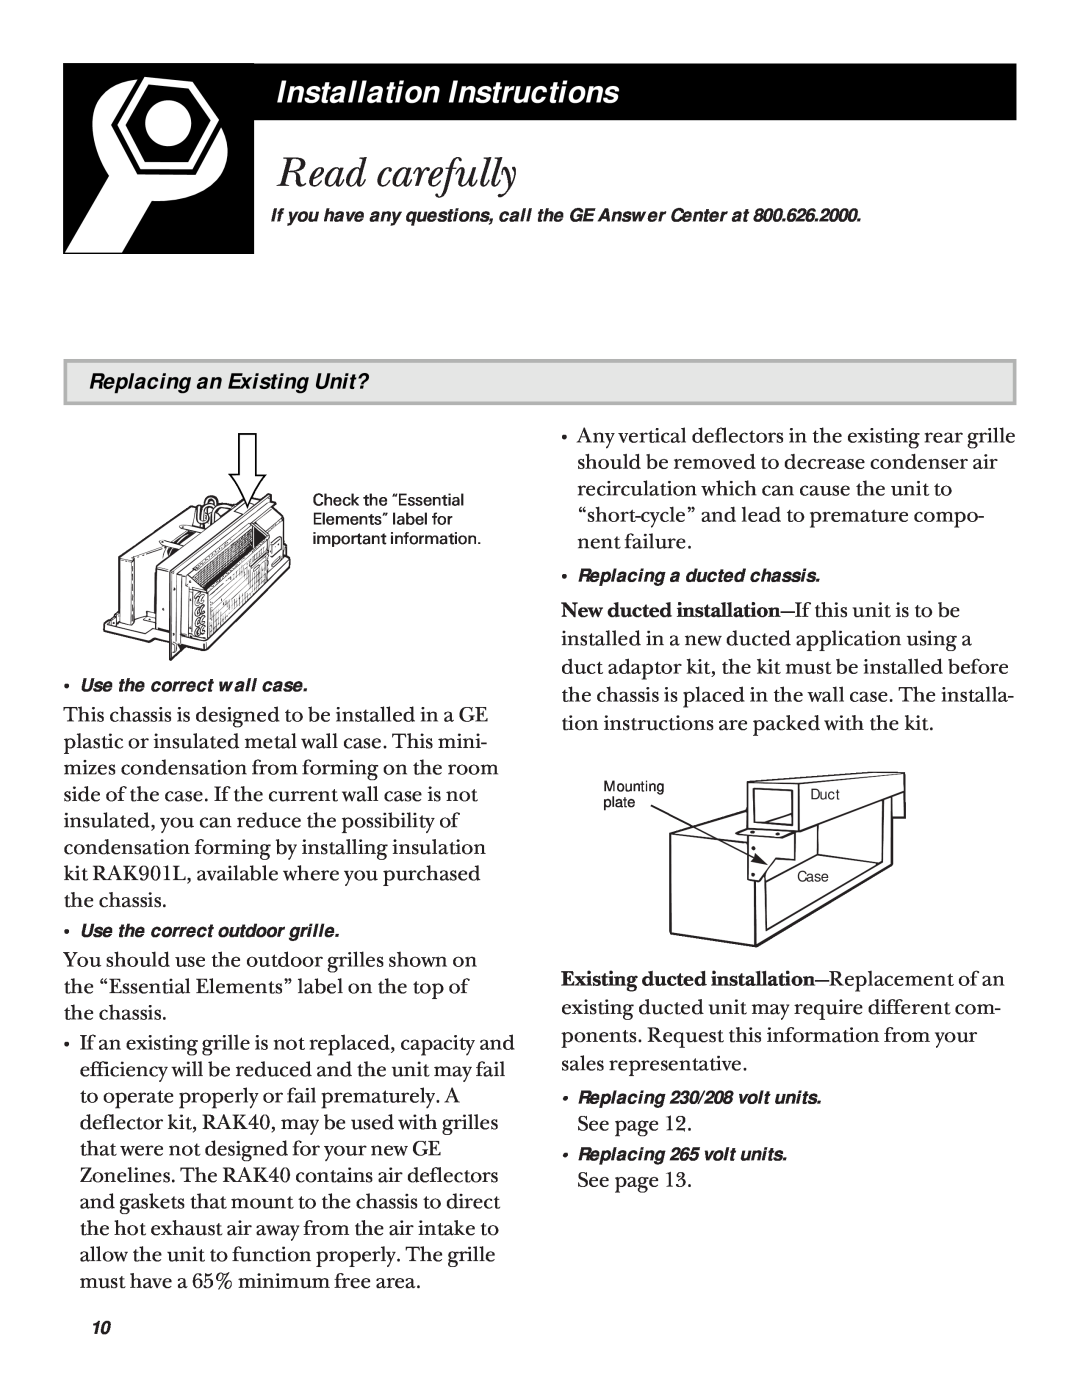 GE 5200 Read carefully, Installation Instructions, Replacing an Existing Unit?, Use the correct wall case 